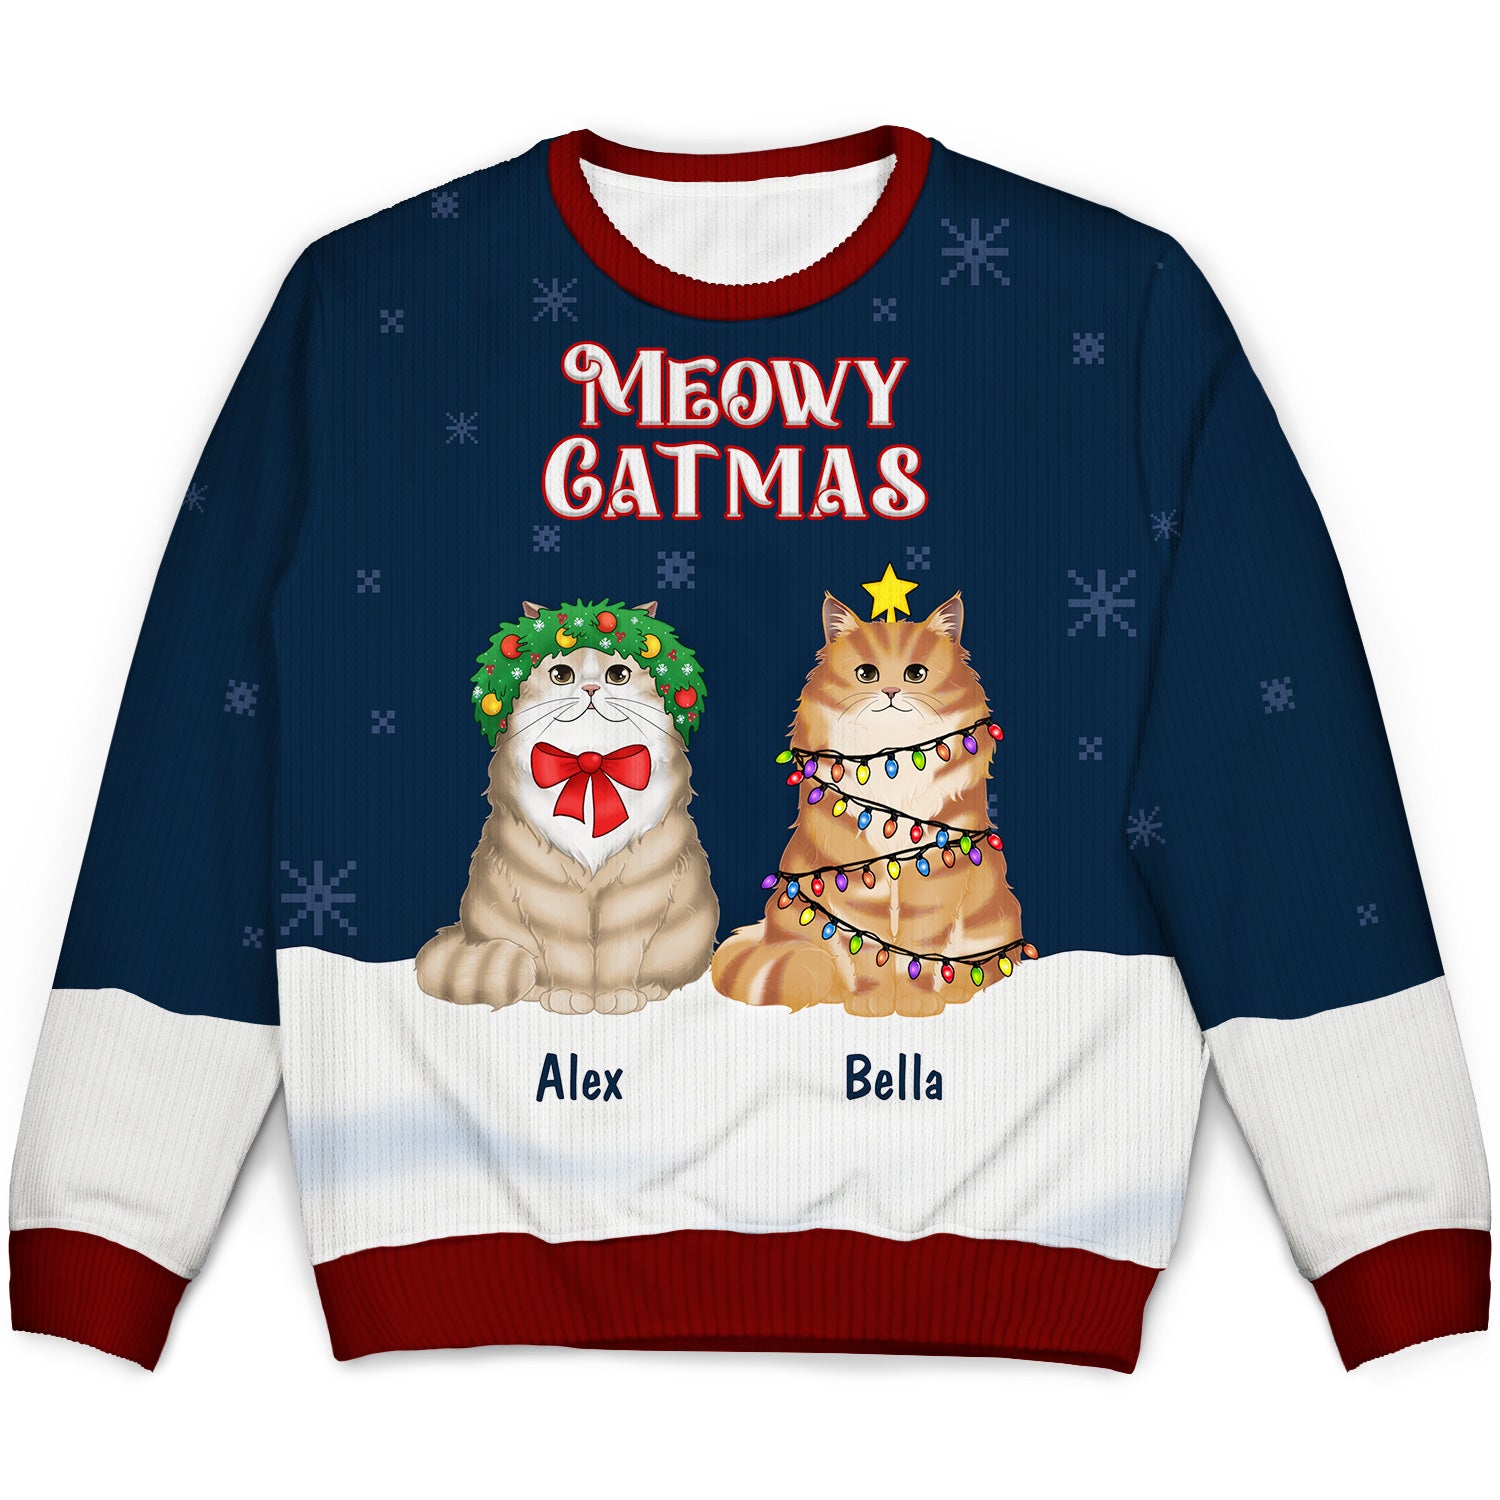 Meowy Catmas - Gift For Cat Lovers - Personalized Unisex Ugly Sweater